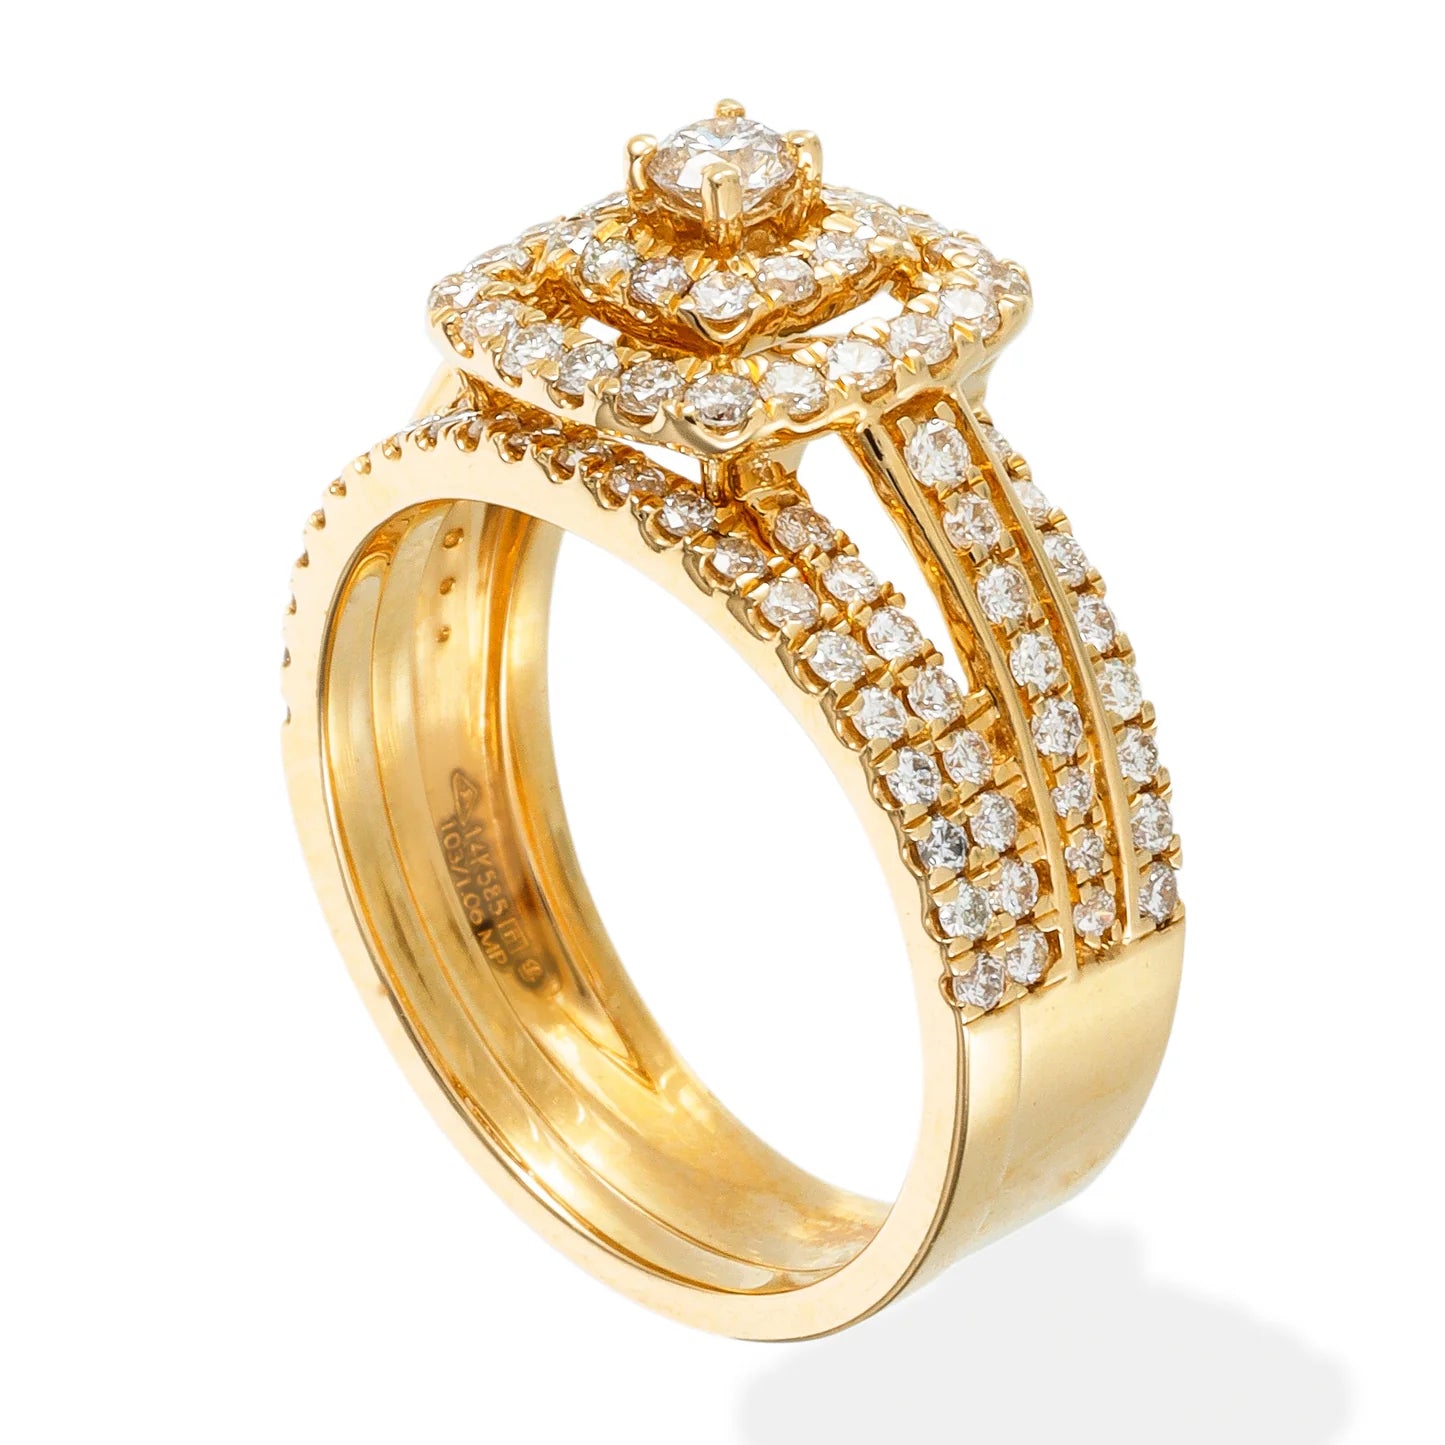 Double Cushion Frame Diamond Ring Set in 14kt Gold